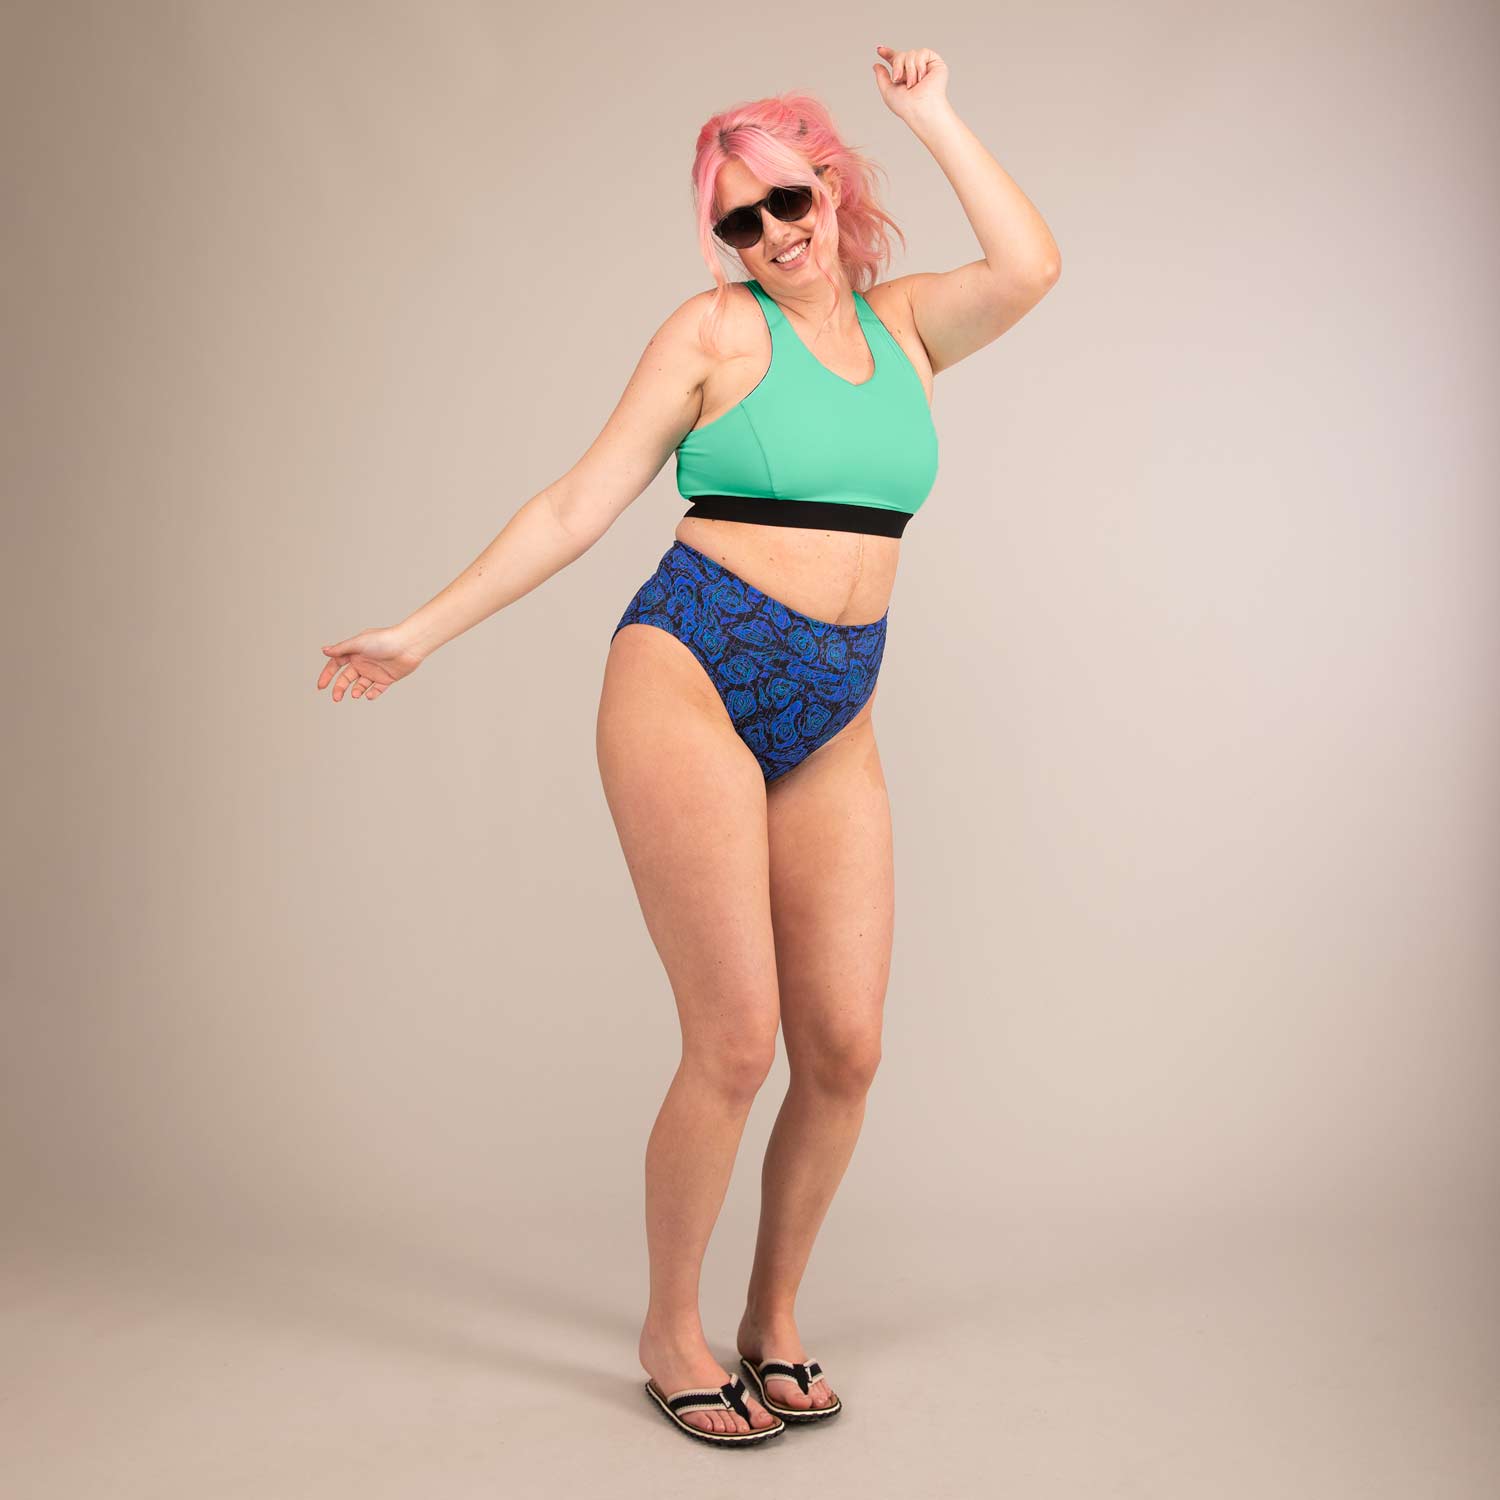 TIDE GEO JAGUAR | High Cut Recycled Bikini Bottoms | 3RD ROCK Clothing -  Sophie is 5ft 9 with a 34" waist, 42" hips and wears a size 16 F